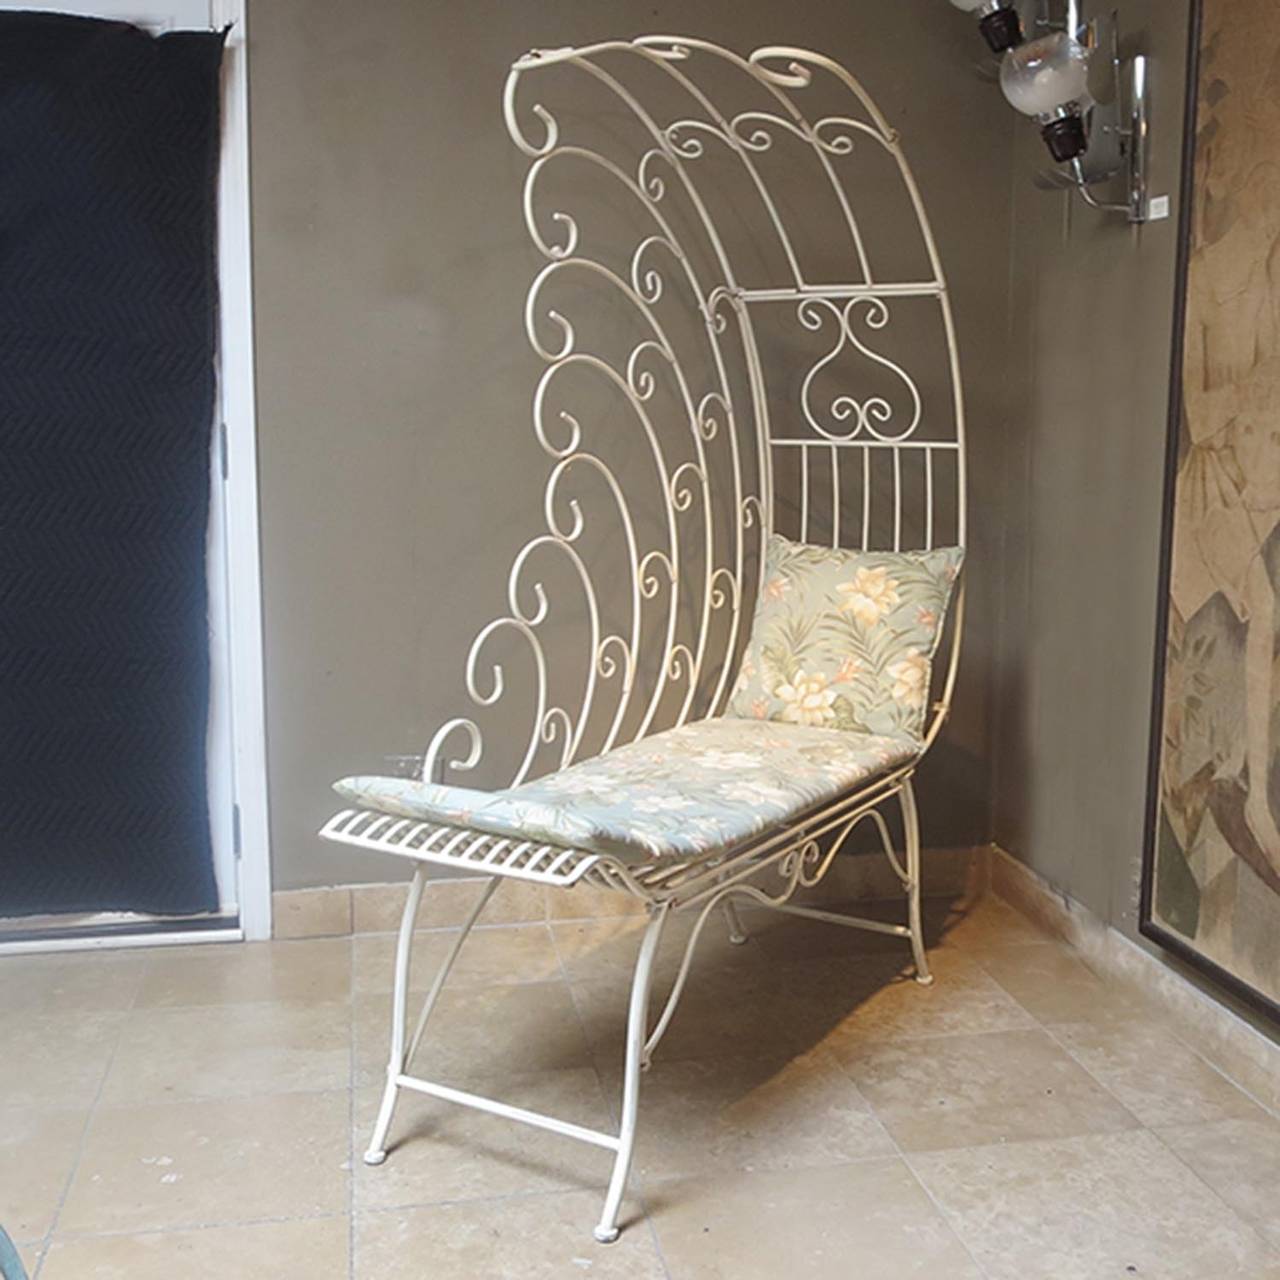 One of the more whimsical and charming chaises we have encountered! All tubes are painted aluminum, so the weight is not oppressive, and it can be easily moved. Newer floral foam cushions were made for it, which are included. This is so great